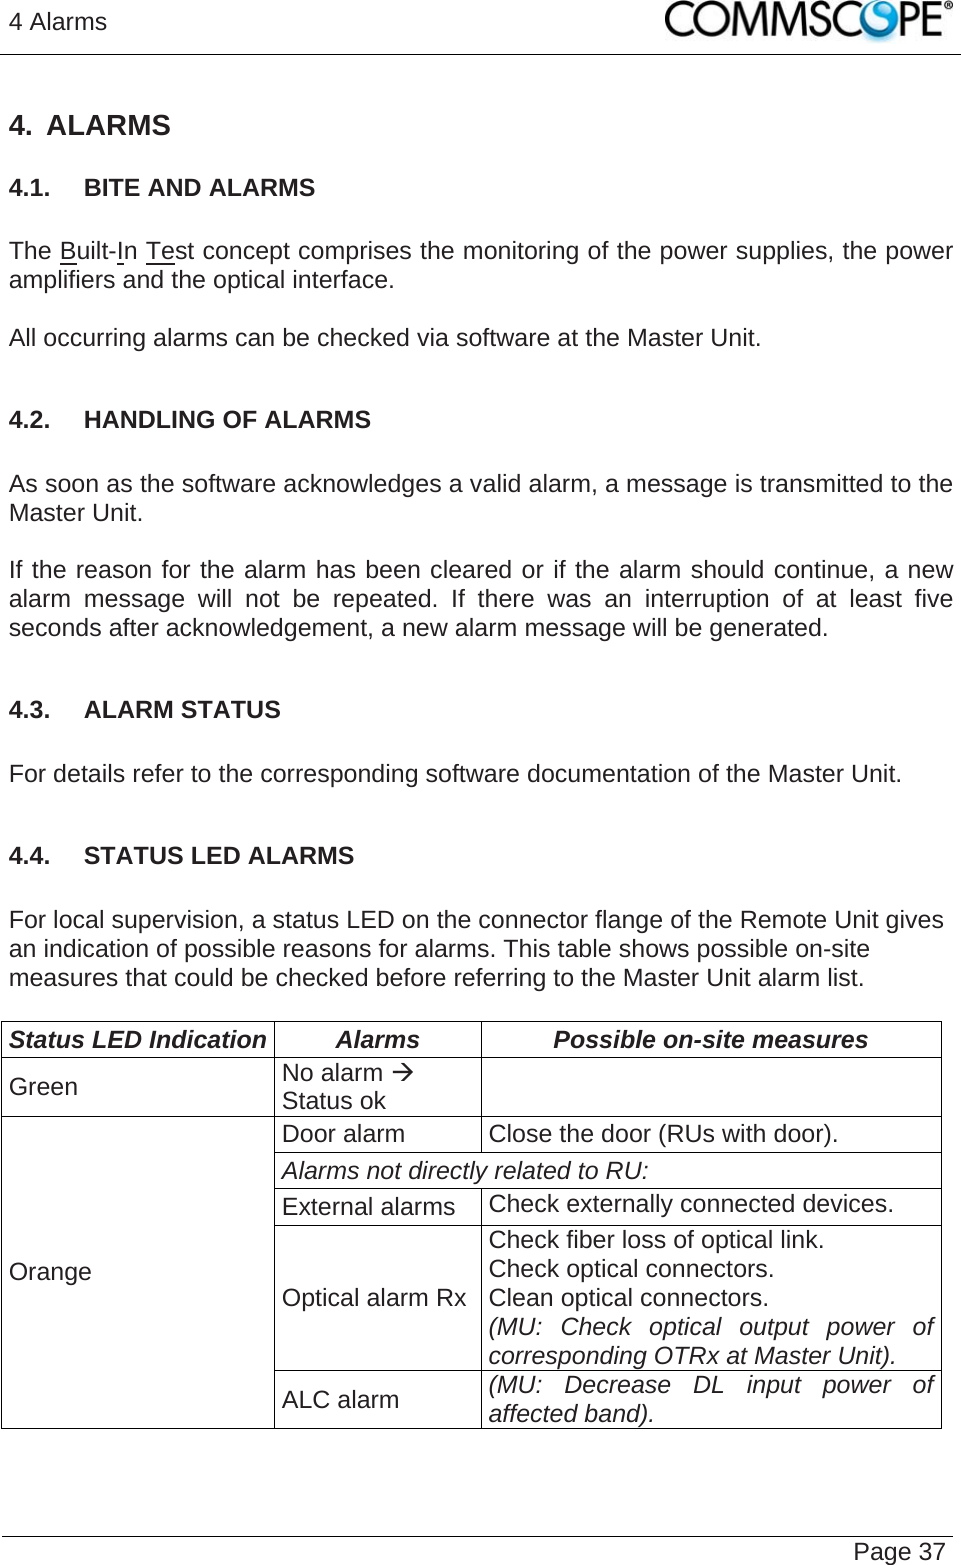 4 Alarms   Page 37 4. ALARMS 4.1.  BITE AND ALARMS  The Built-In Test concept comprises the monitoring of the power supplies, the power amplifiers and the optical interface.  All occurring alarms can be checked via software at the Master Unit.  4.2.  HANDLING OF ALARMS  As soon as the software acknowledges a valid alarm, a message is transmitted to the Master Unit.  If the reason for the alarm has been cleared or if the alarm should continue, a new alarm message will not be repeated. If there was an interruption of at least five seconds after acknowledgement, a new alarm message will be generated.  4.3.  ALARM STATUS  For details refer to the corresponding software documentation of the Master Unit.  4.4.  STATUS LED ALARMS  For local supervision, a status LED on the connector flange of the Remote Unit gives an indication of possible reasons for alarms. This table shows possible on-site measures that could be checked before referring to the Master Unit alarm list.  Status LED Indication  Alarms  Possible on-site measures Green  No alarm Æ Status ok   Door alarm  Close the door (RUs with door). Alarms not directly related to RU:  External alarms  Check externally connected devices. Optical alarm Rx Check fiber loss of optical link. Check optical connectors. Clean optical connectors. (MU: Check optical output power of corresponding OTRx at Master Unit). Orange ALC alarm  (MU: Decrease DL input power of affected band). 